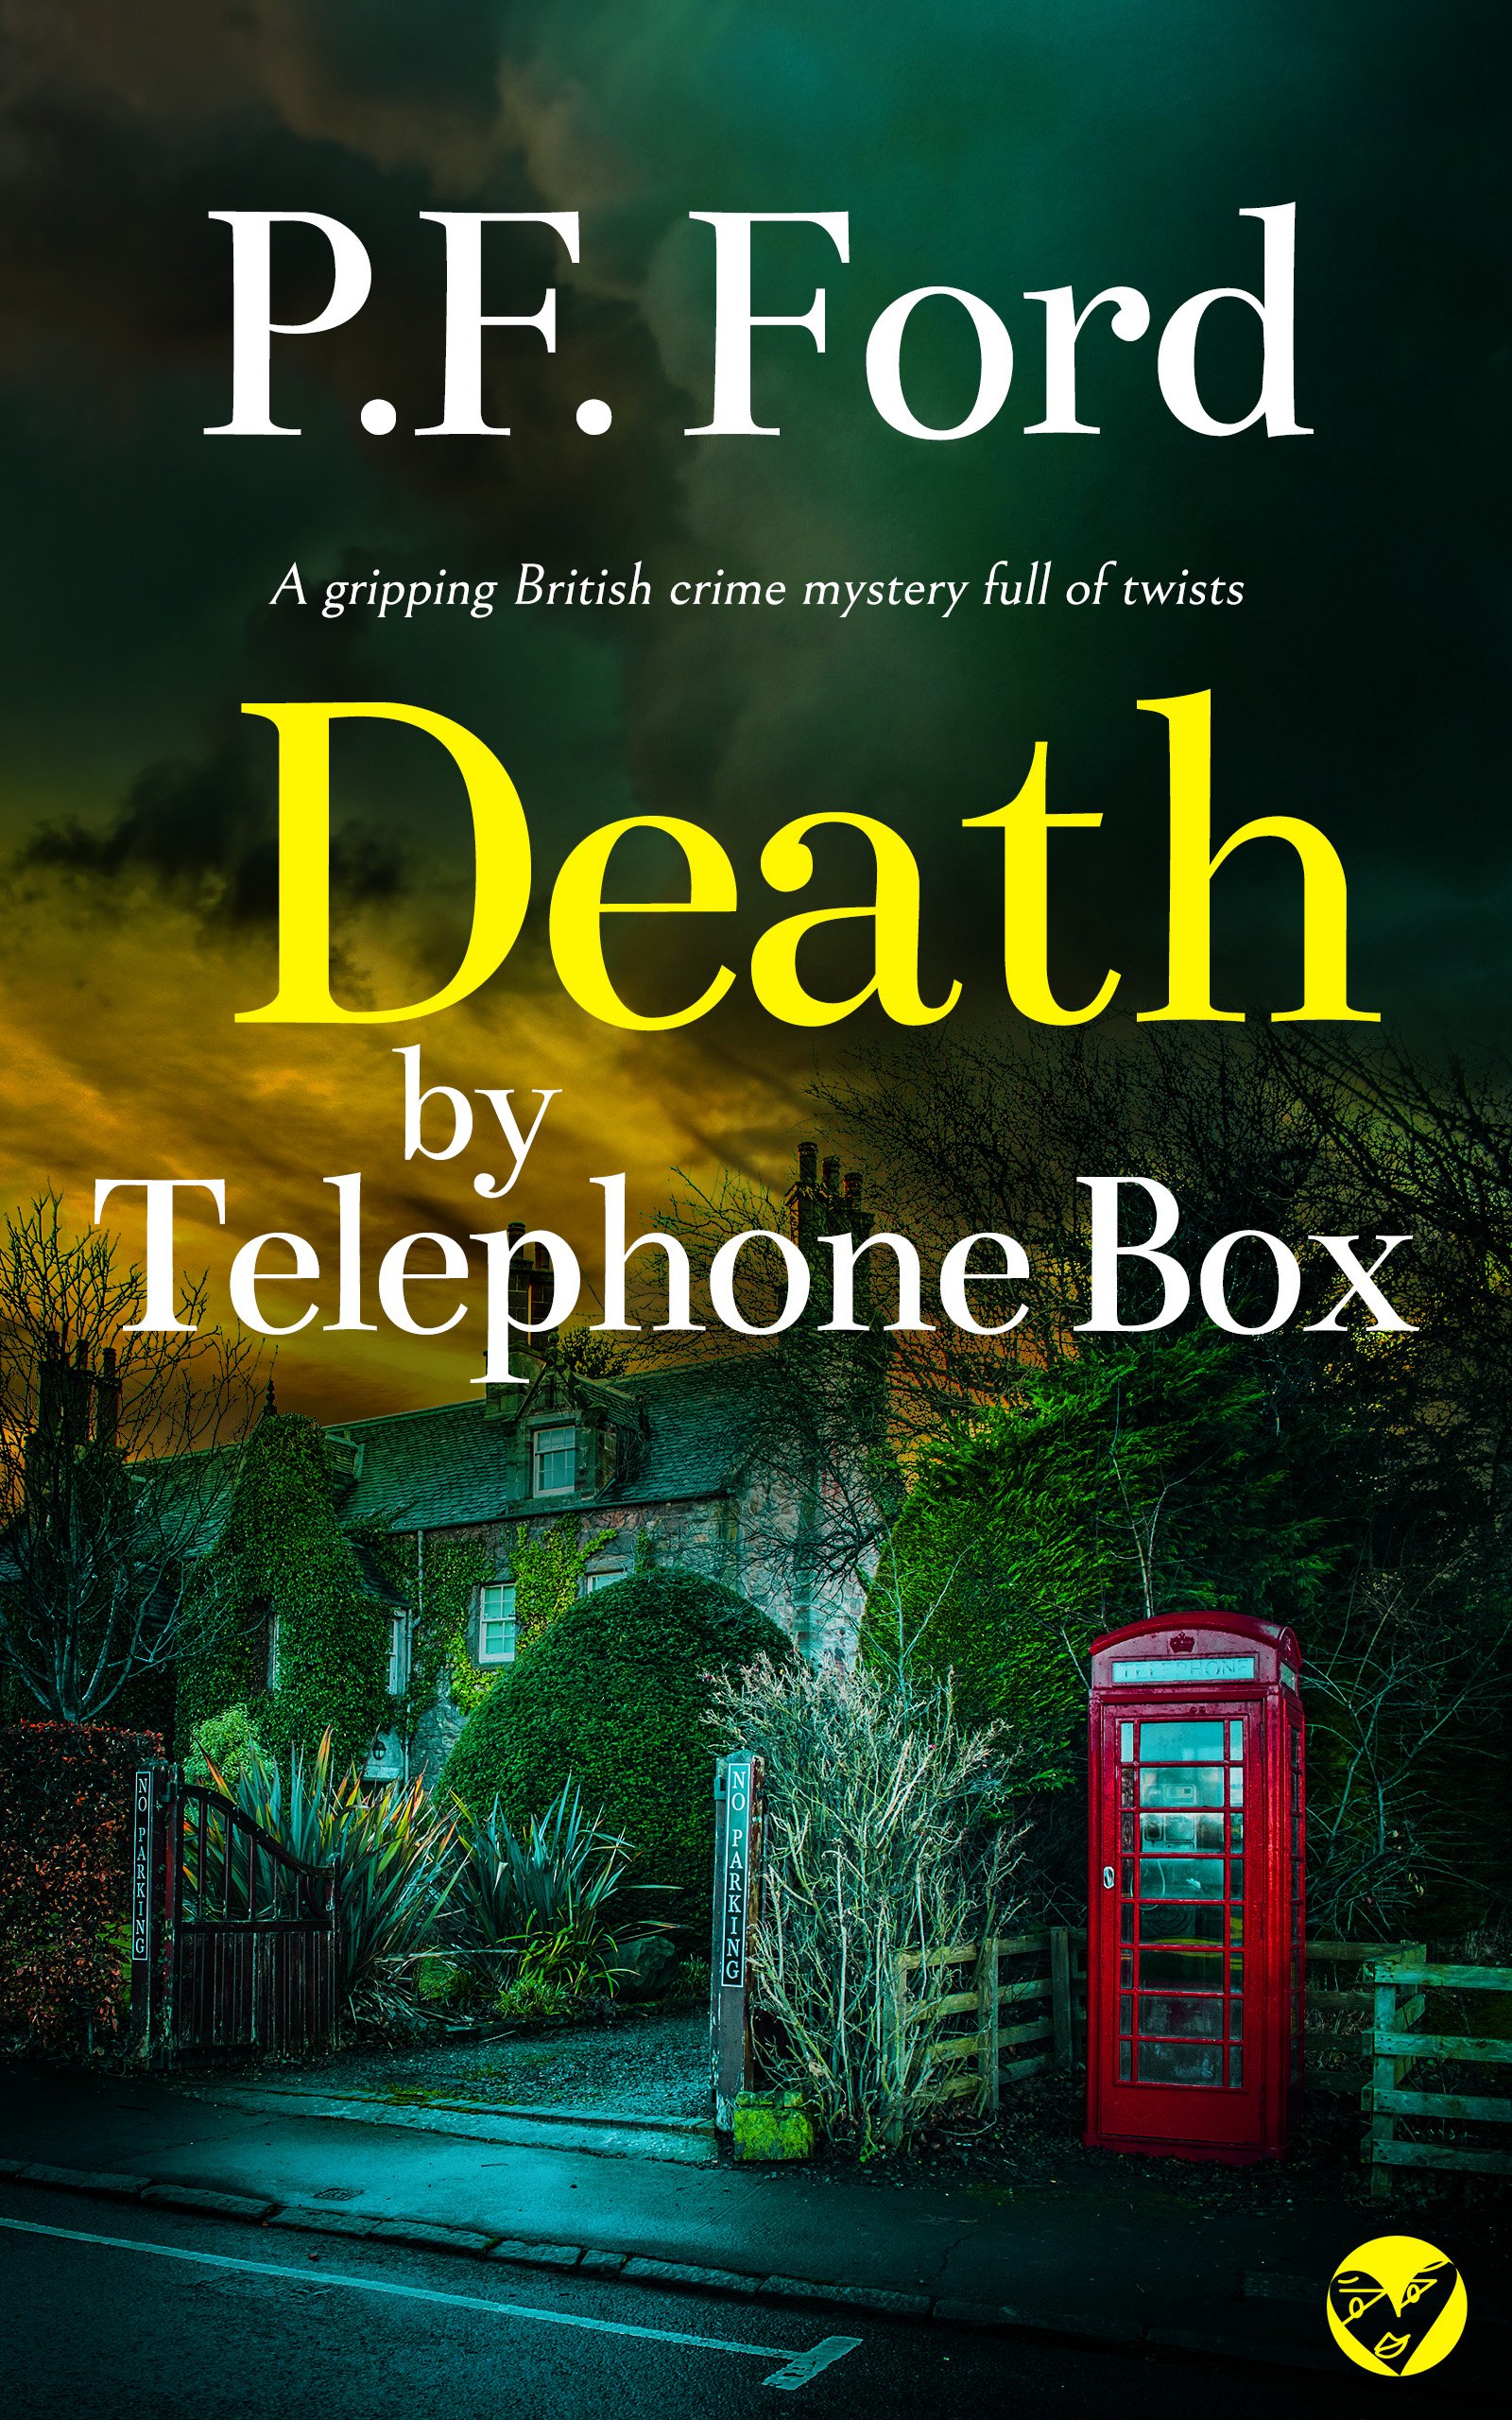 DEATH BY TELEPHONE BOX cover publish.jpg